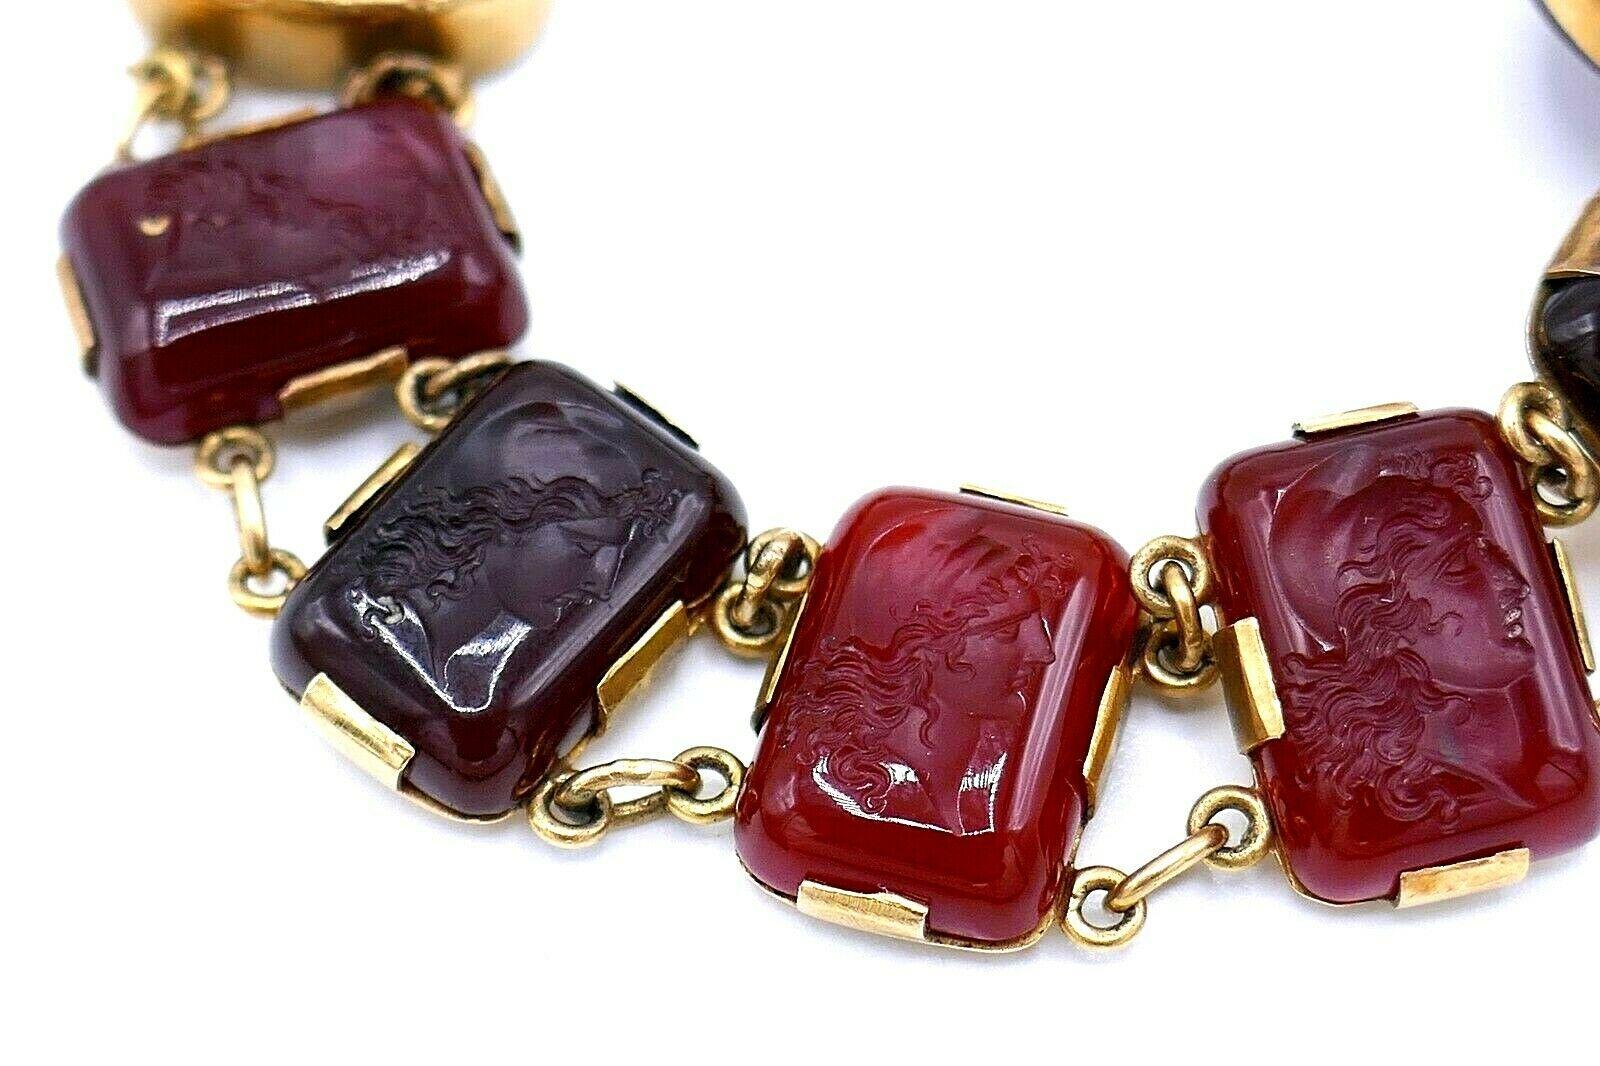 Victorian carved carnelian cameo bracelet with ten rectangular cameos depicting classical female profiles. The central carnelian is a spinner: one side is a scarab, another has a carved figure of a hunter/warrior. Setting is made of 14k yellow gold